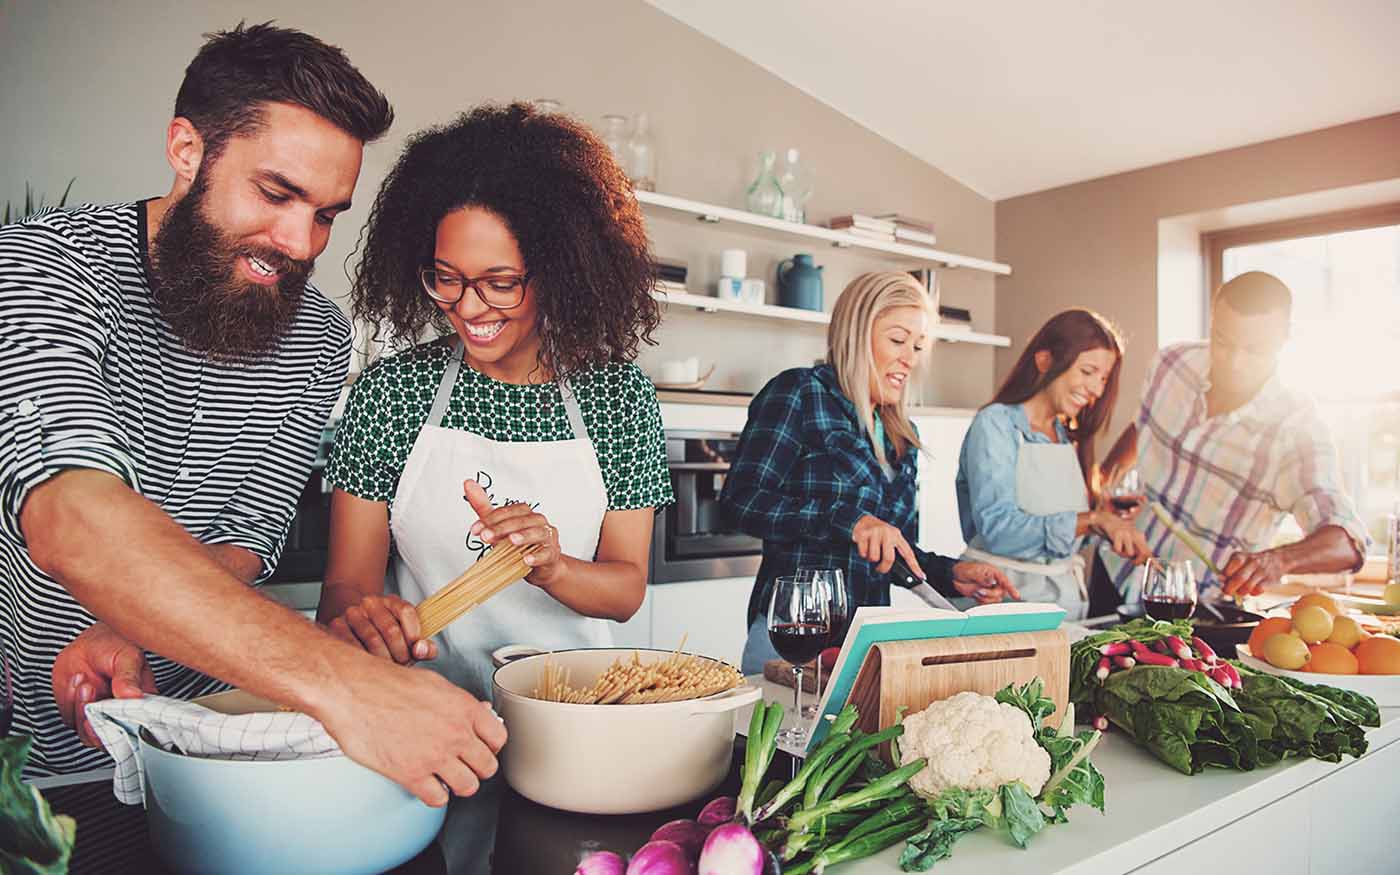 Group nutrition counseling through Dietitian in Your Kitchen's knowledgeable staff